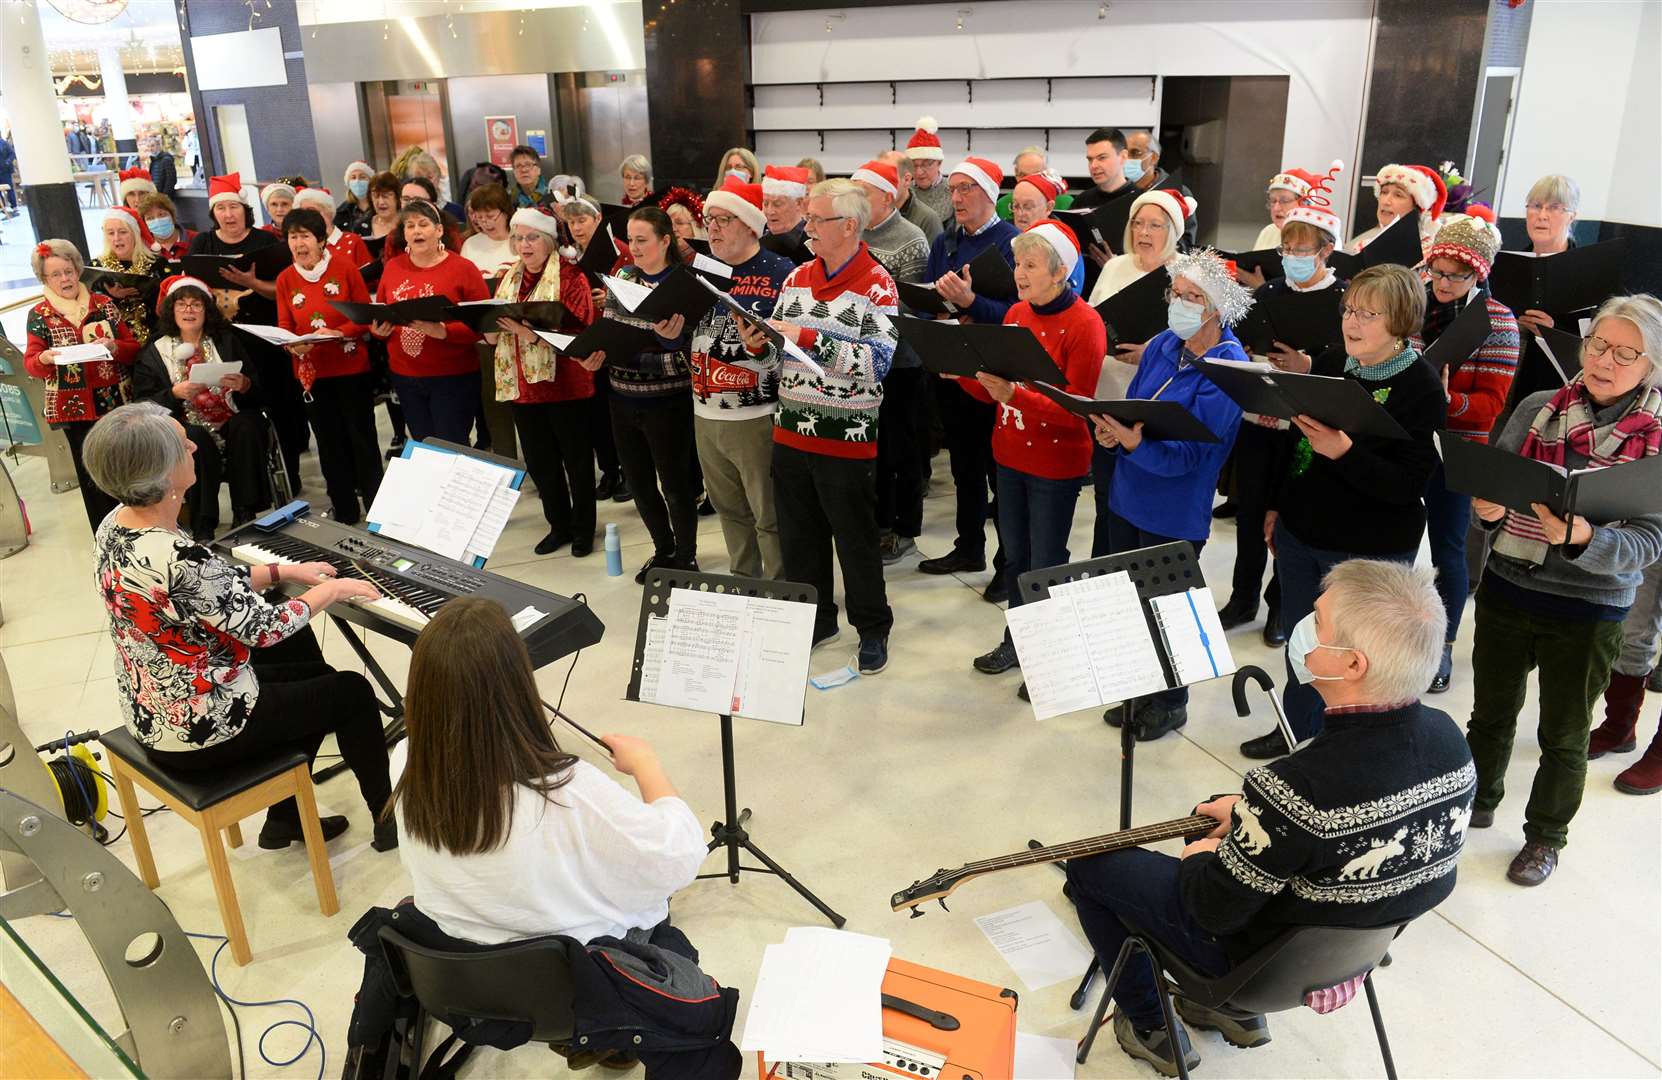 Shoppers in the Eastgate Shopping Centre in Inverness were treated to carols by the Acclaim Choir whose members come from churches in the Inverness and Black Isle area.